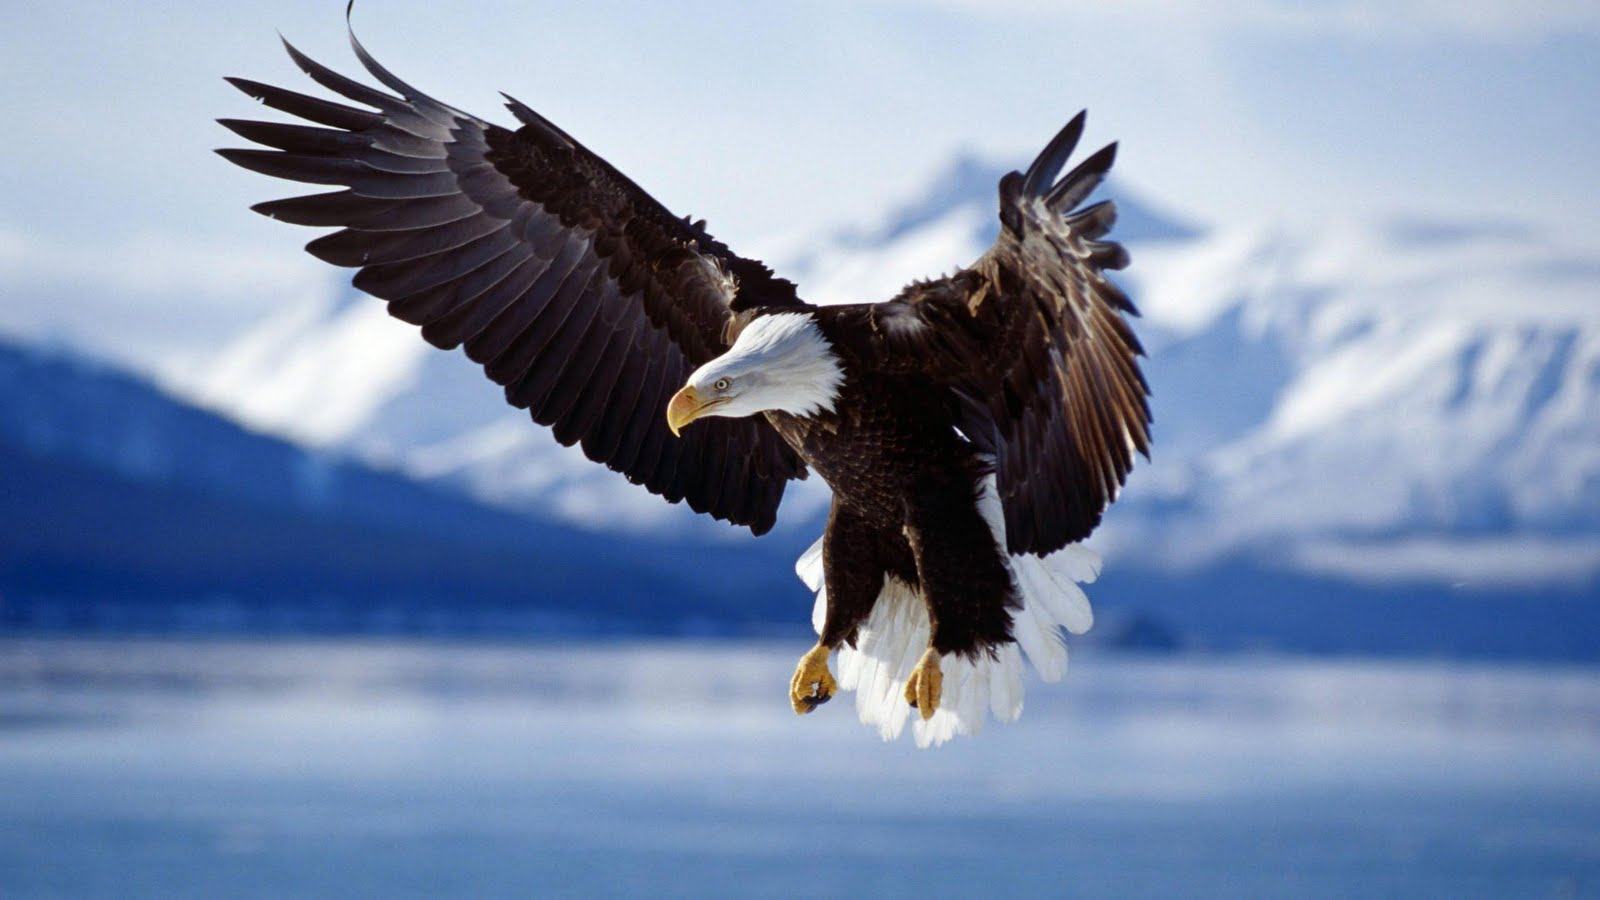 cool images of eagles download